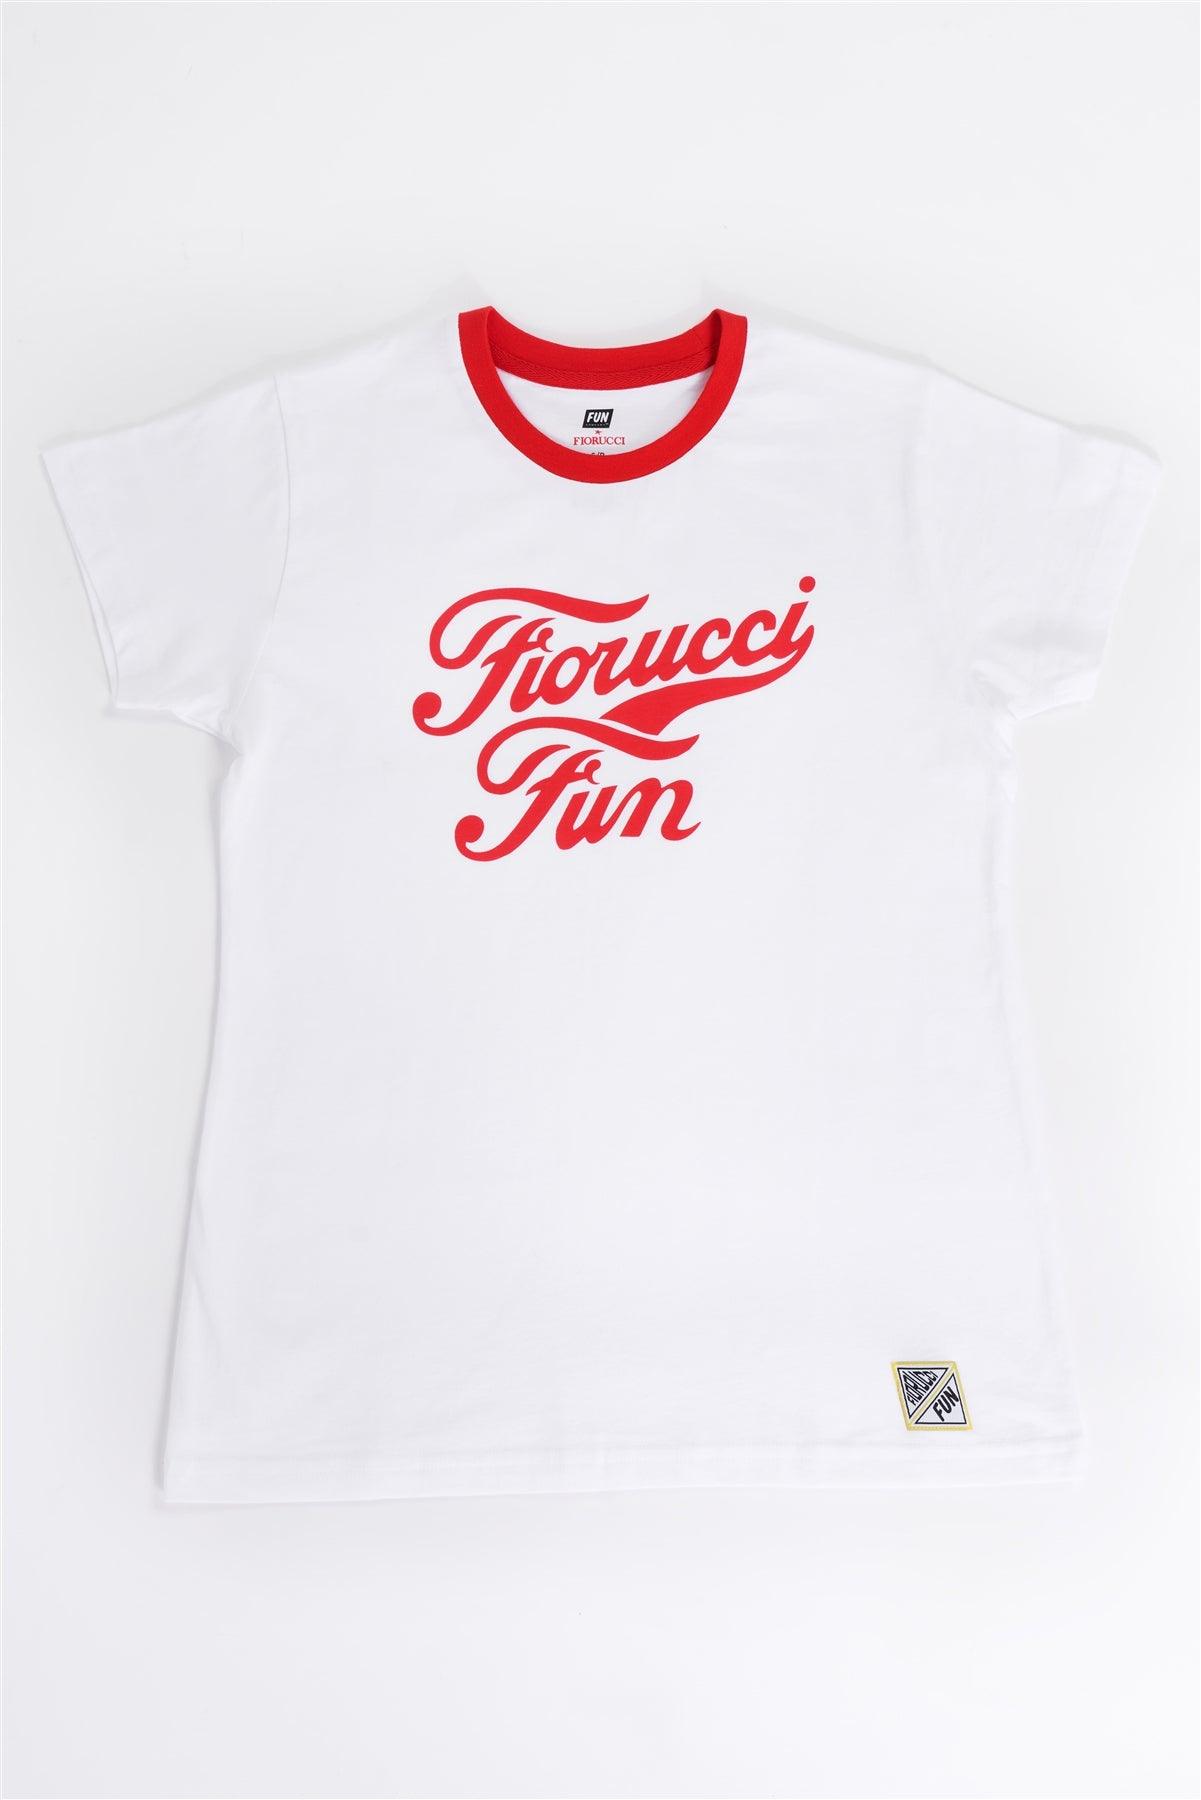 Fiorucci Fun White & Red Printed Logo T-Shirt For Her